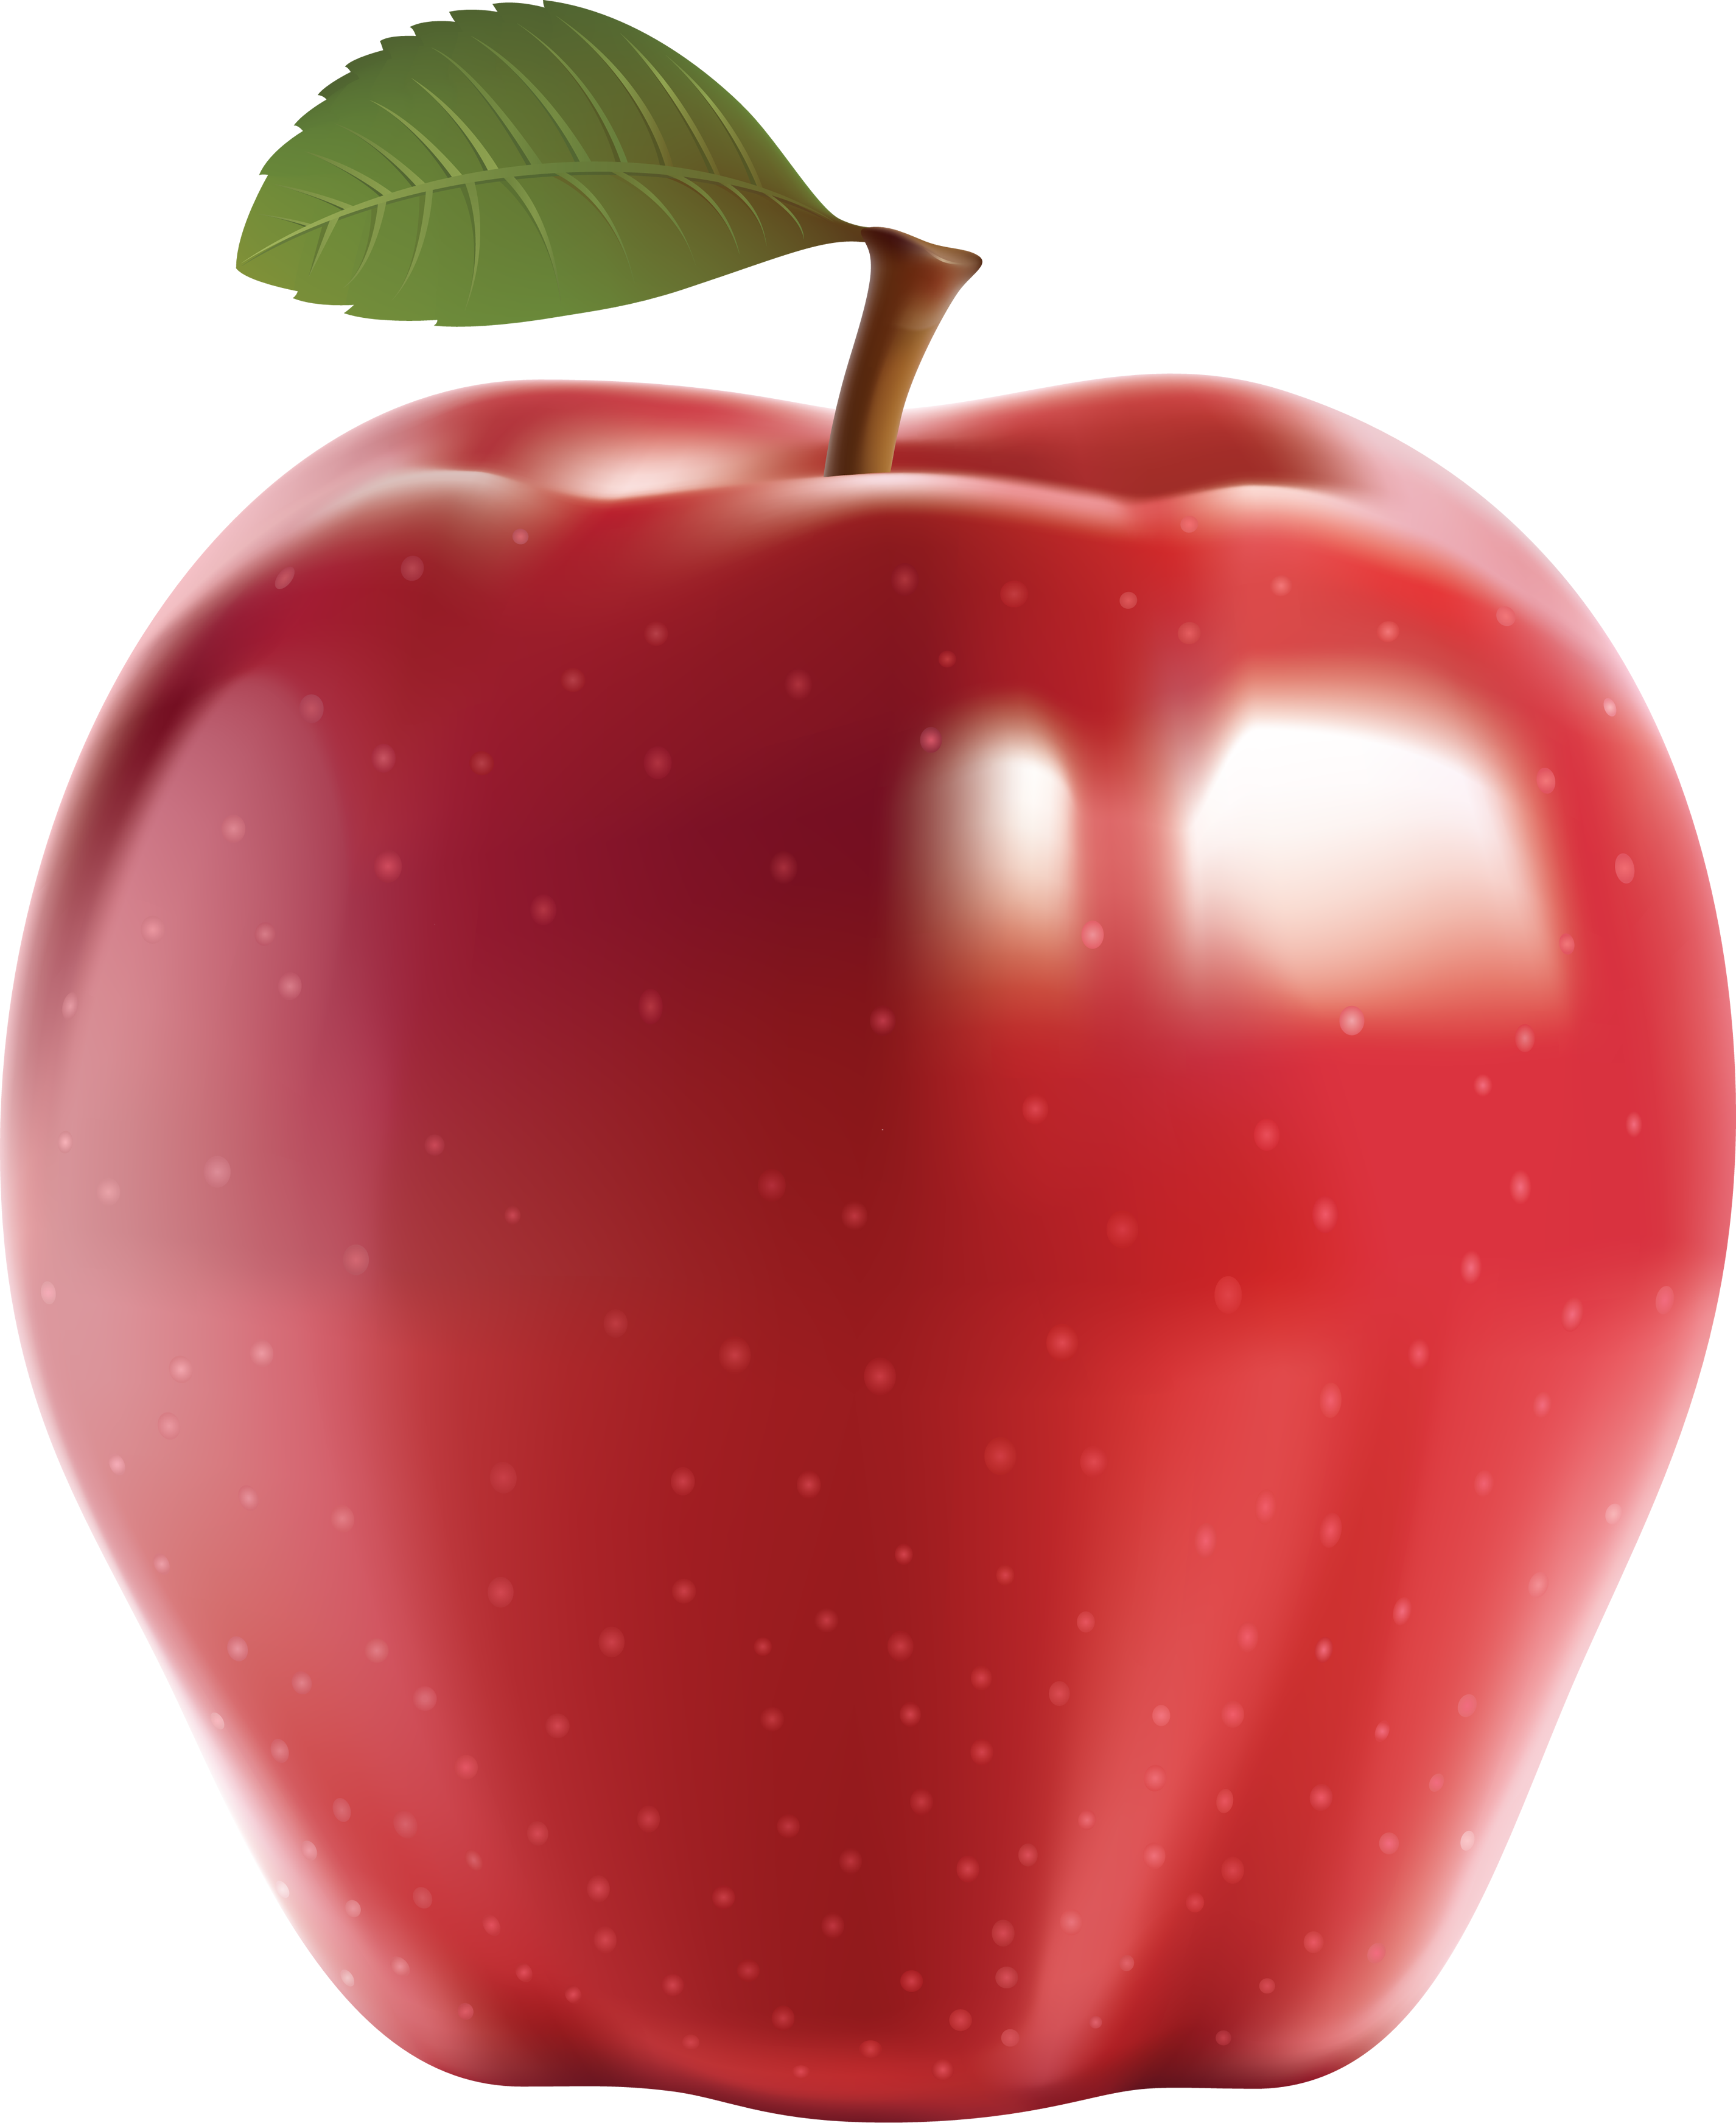 classic red apple with leaf png image